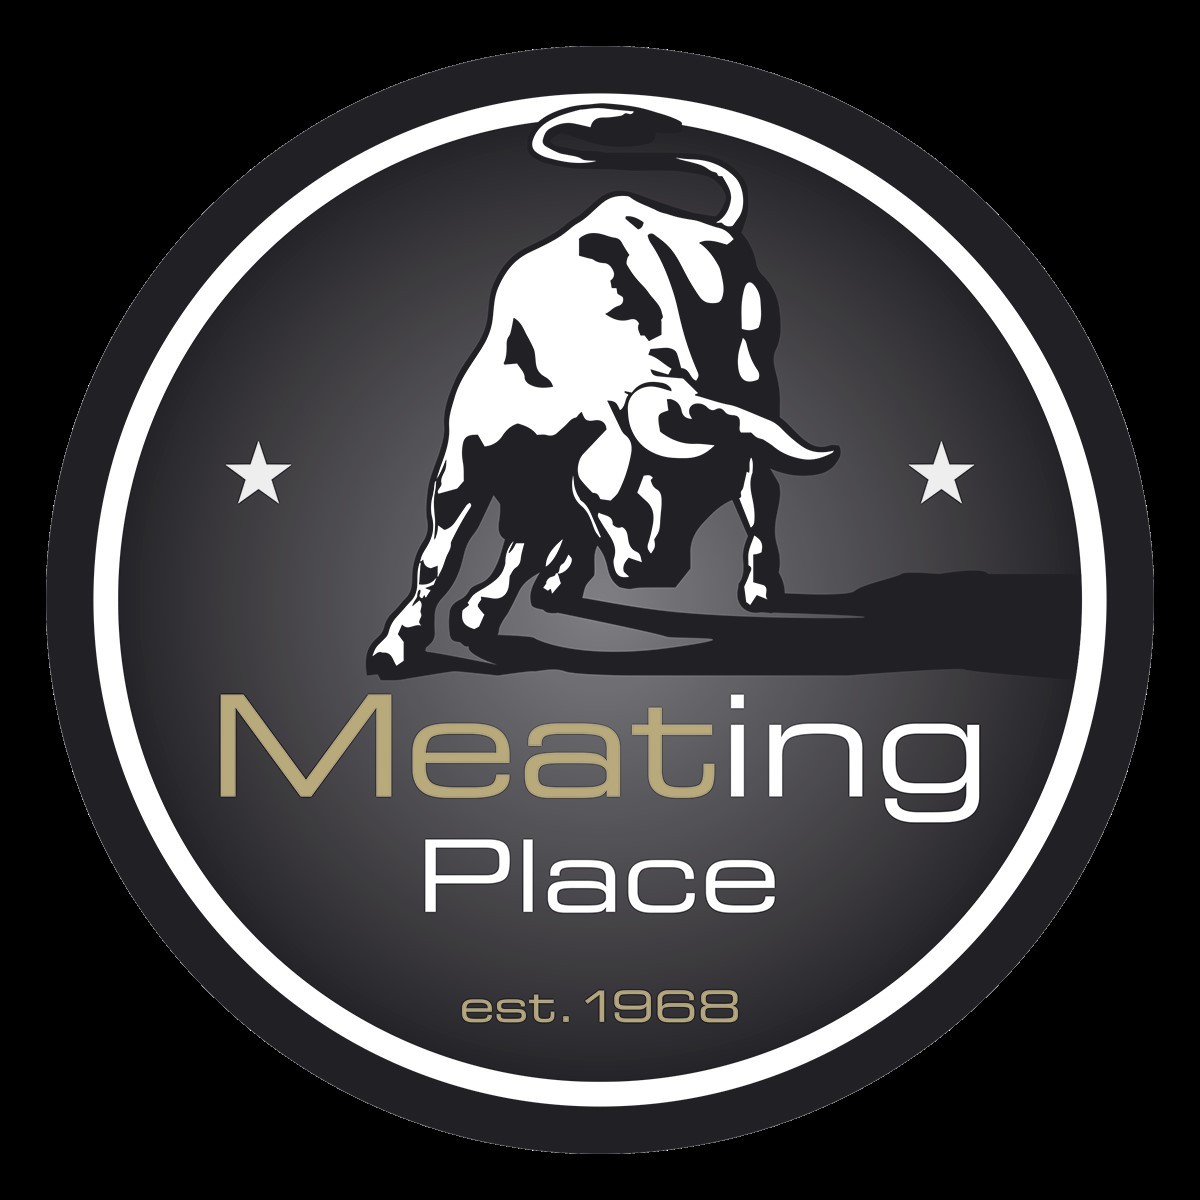 meating-place-didaskaloy20png.jpg